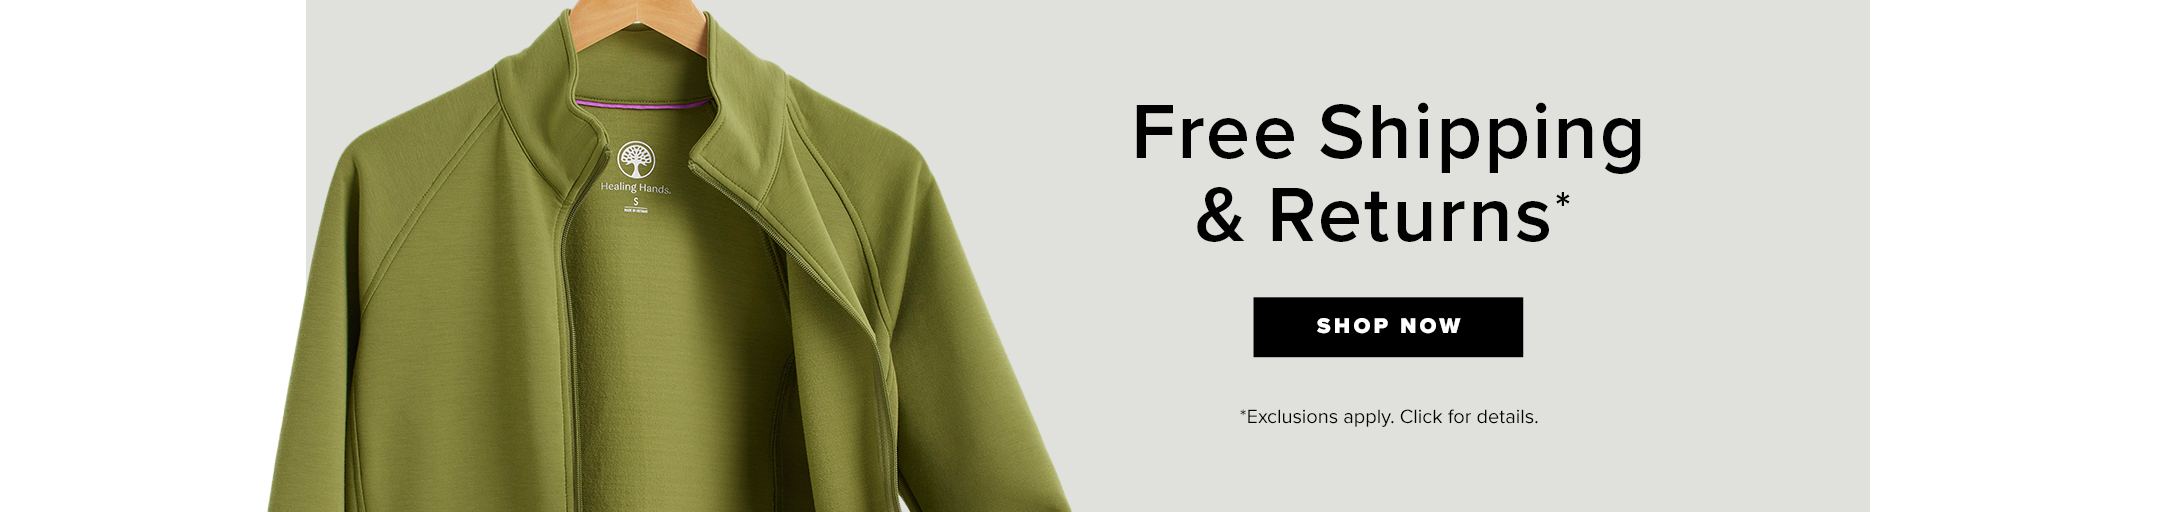 Free Shipping & Returns*

[shop now]

*Exclusions apply. Click for details.